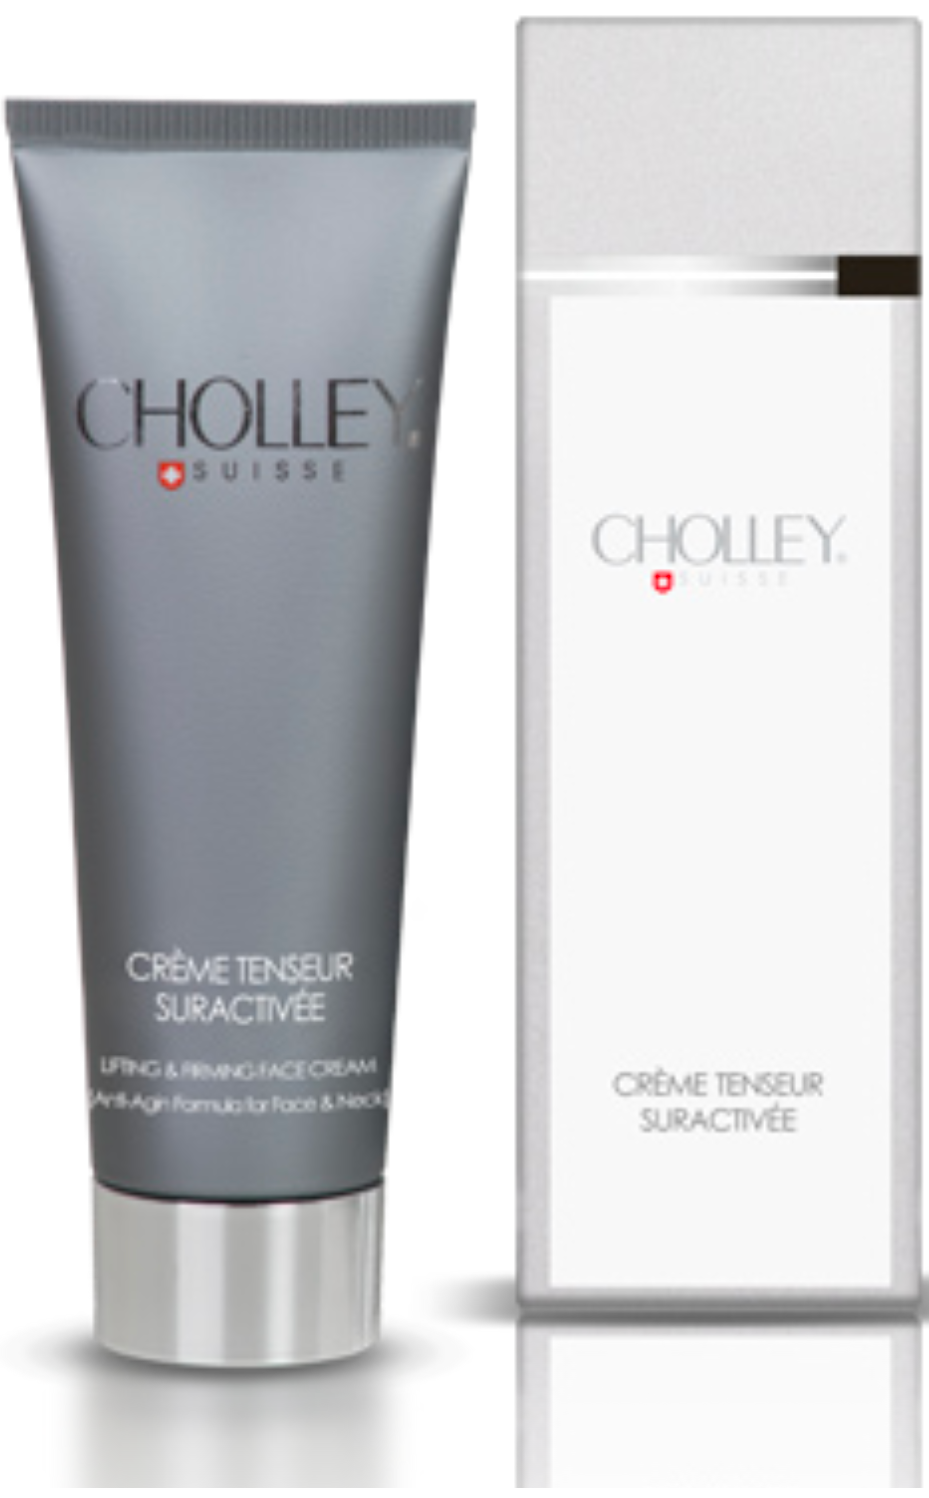 Methode Cholley 皇室面頸緊緻霜 Cholley® FIRMING CREAM FOR FACE & NECK